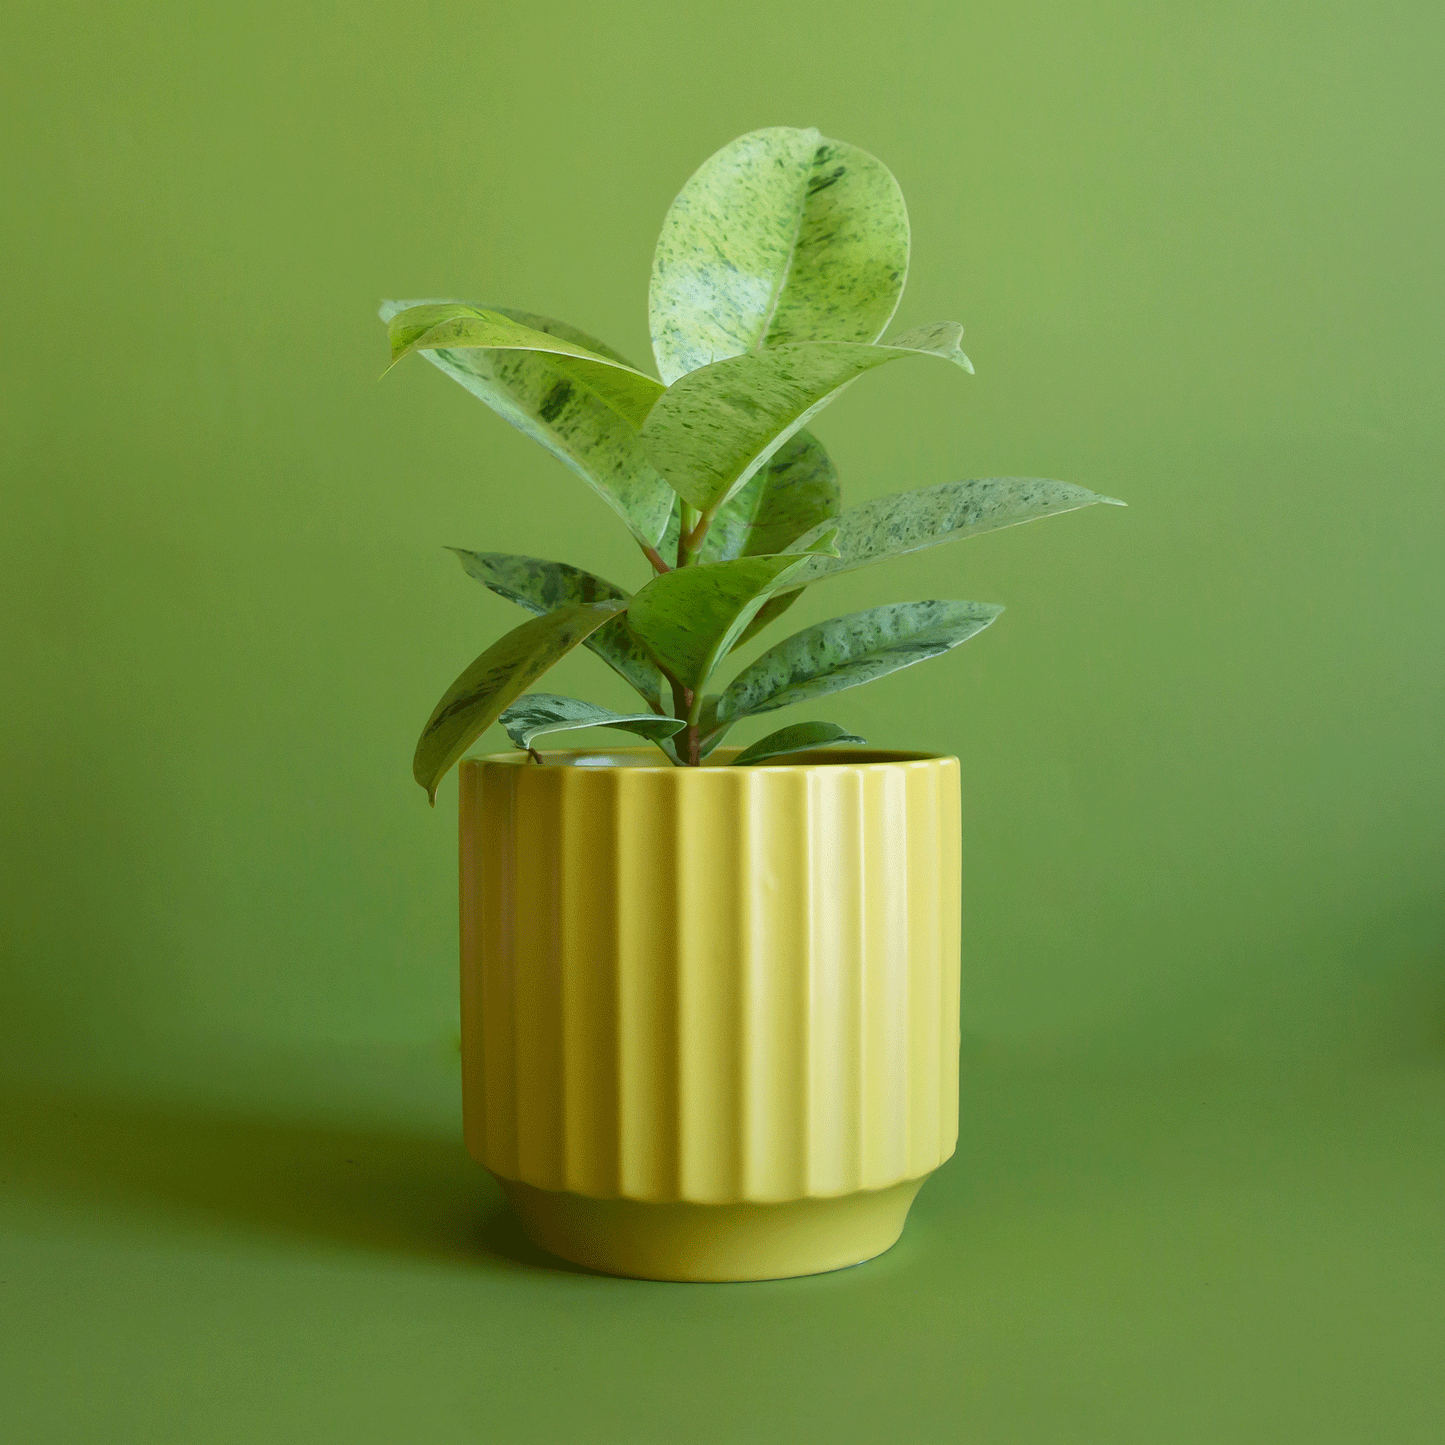 On a green background is a ribbed chartreuse planter filled with a green house plant inside.